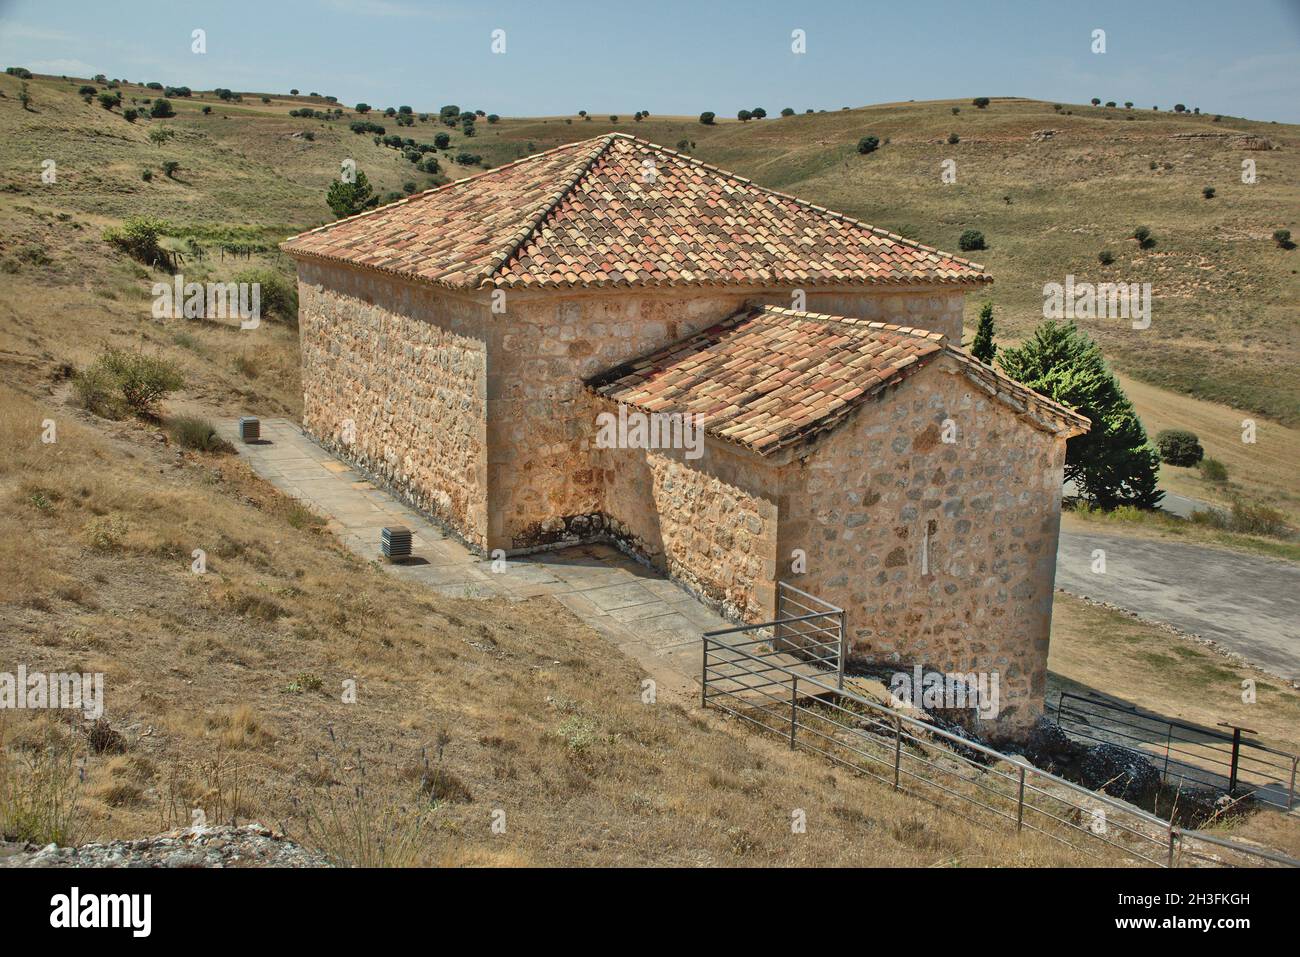 Upper view of the Mozarabic hermitage of San Baudelio, built in the 11th century, consisting of a main nave and an apse. Casillas de Berlanga, Soria. Stock Photo